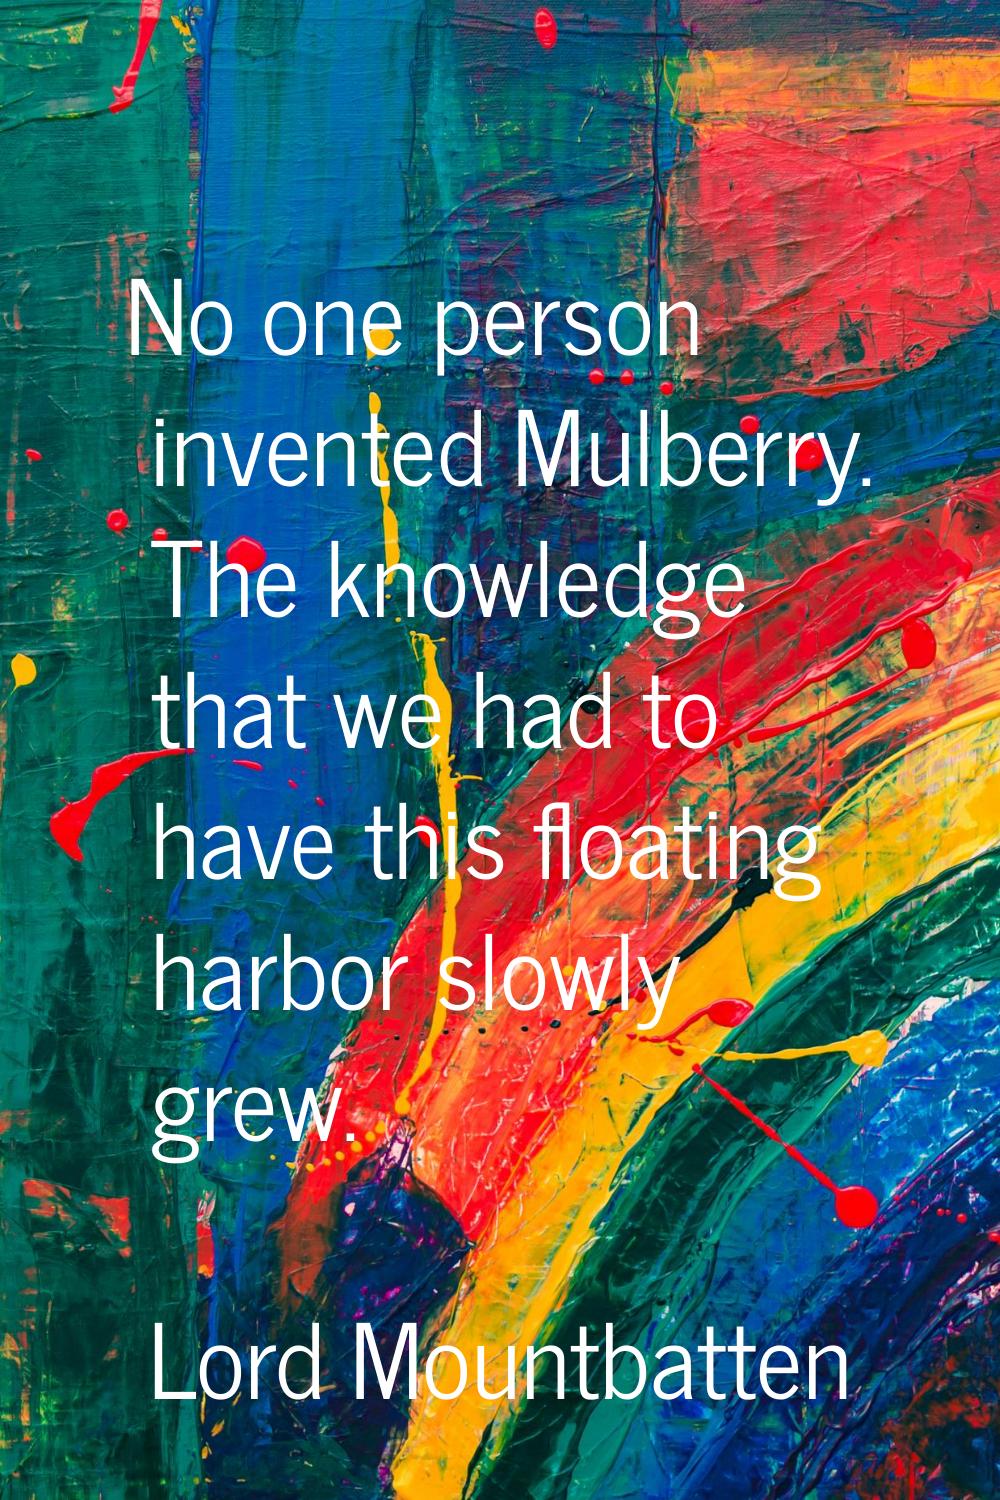 No one person invented Mulberry. The knowledge that we had to have this floating harbor slowly grew